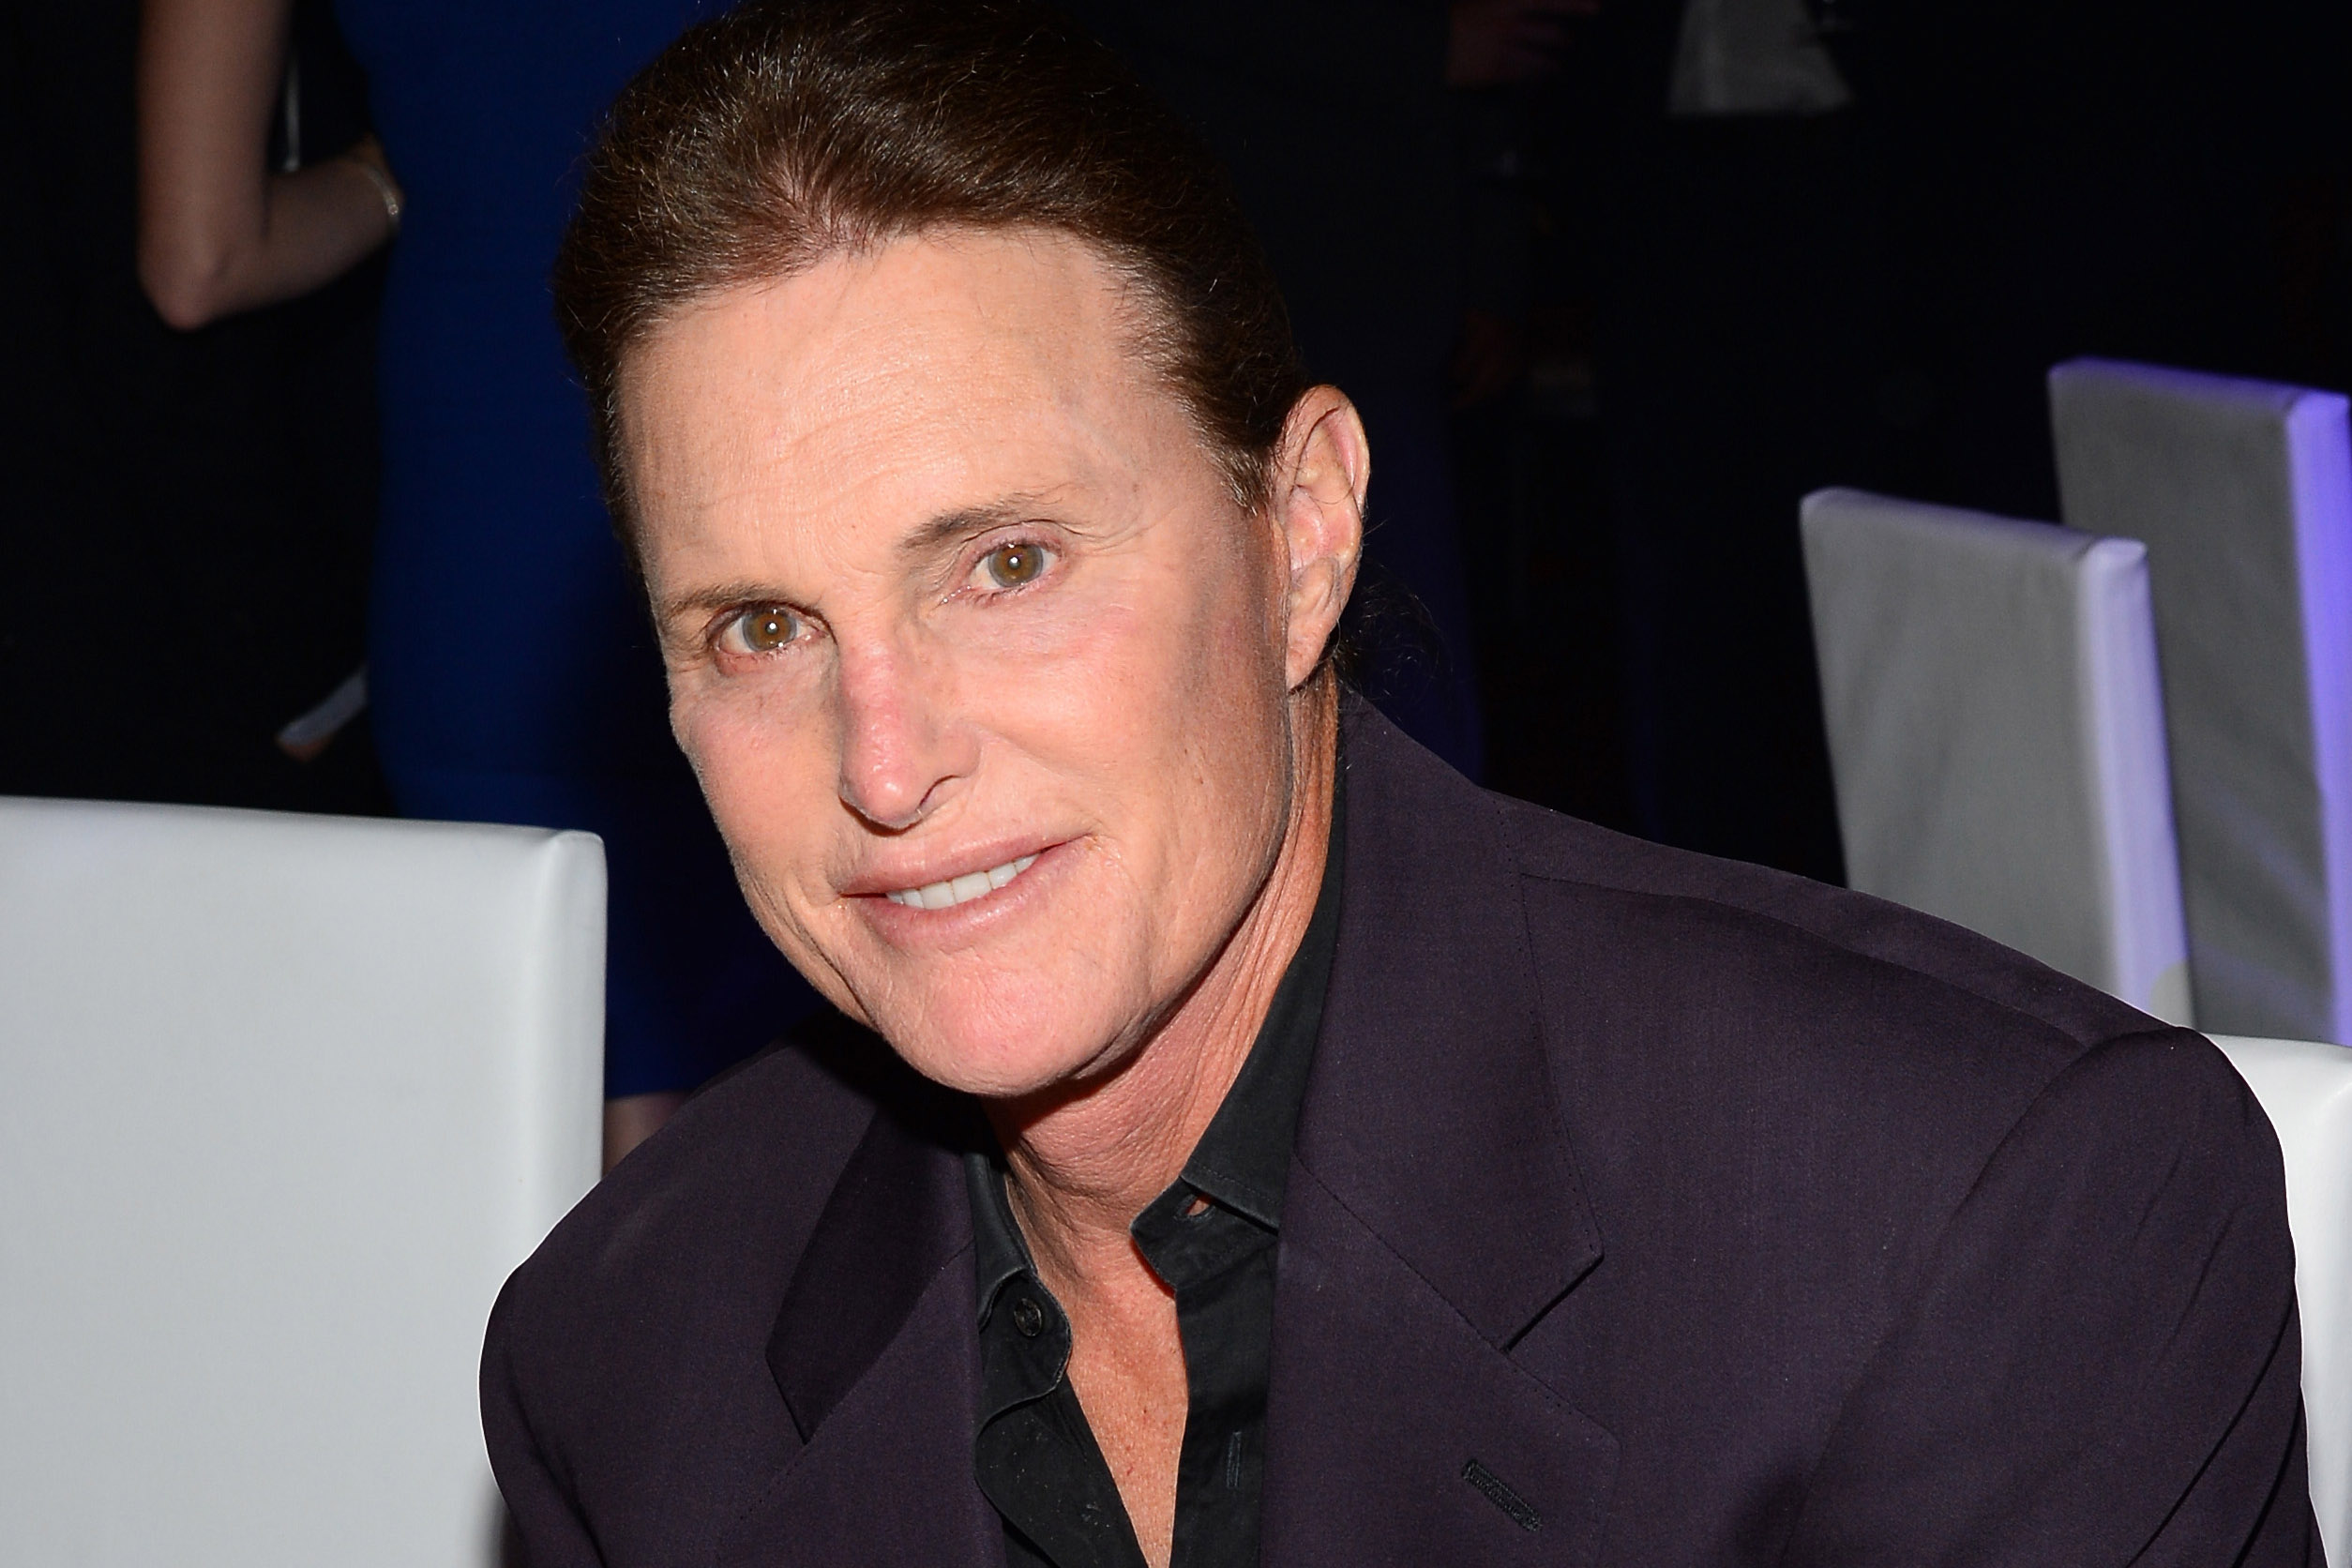 Why the church may have a bigger identity crisis than Bruce Jenner